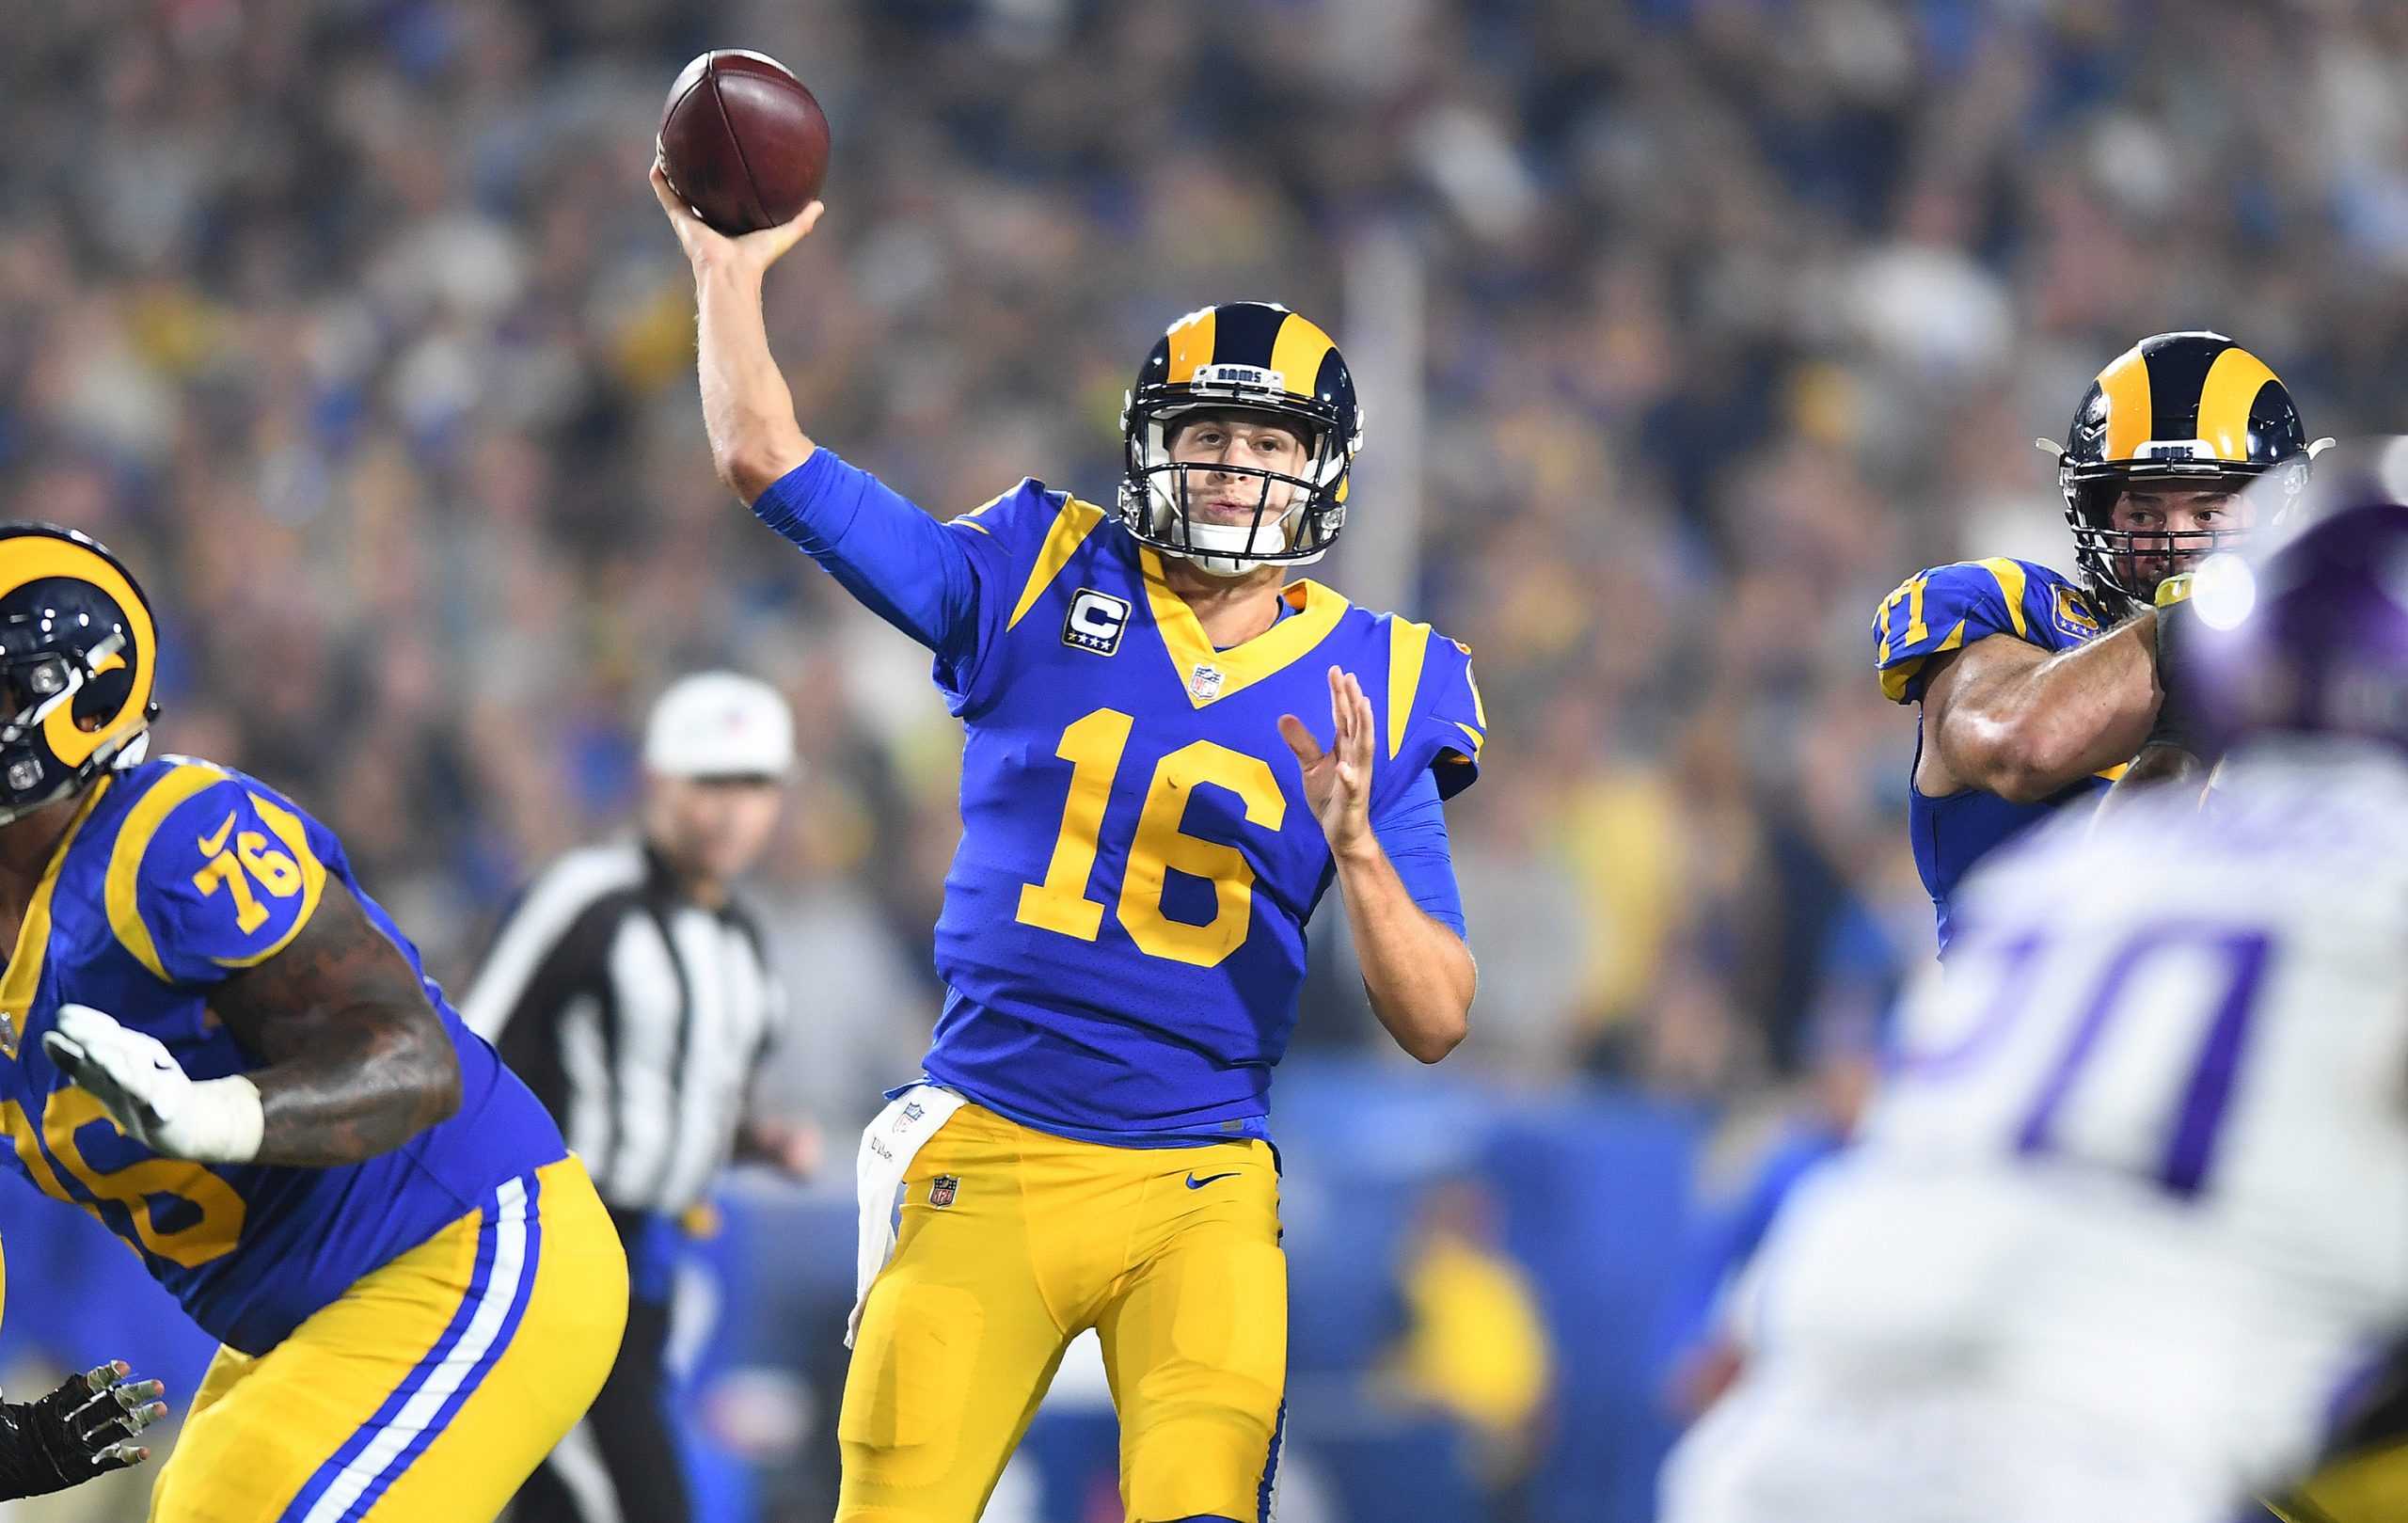 Los Angeles Rams quarterback Jared Goff (16) puts the ball in the air against the Minnesota Vikings in the third quarter at the Los Angeles Memorial Coliseum on Thursday, Sept. 27, 2018. The Rams won, 38-31, with Goff throwing for 465 yards and five touchdowns. (Wally Skalij/Los Angeles Times/TNS)